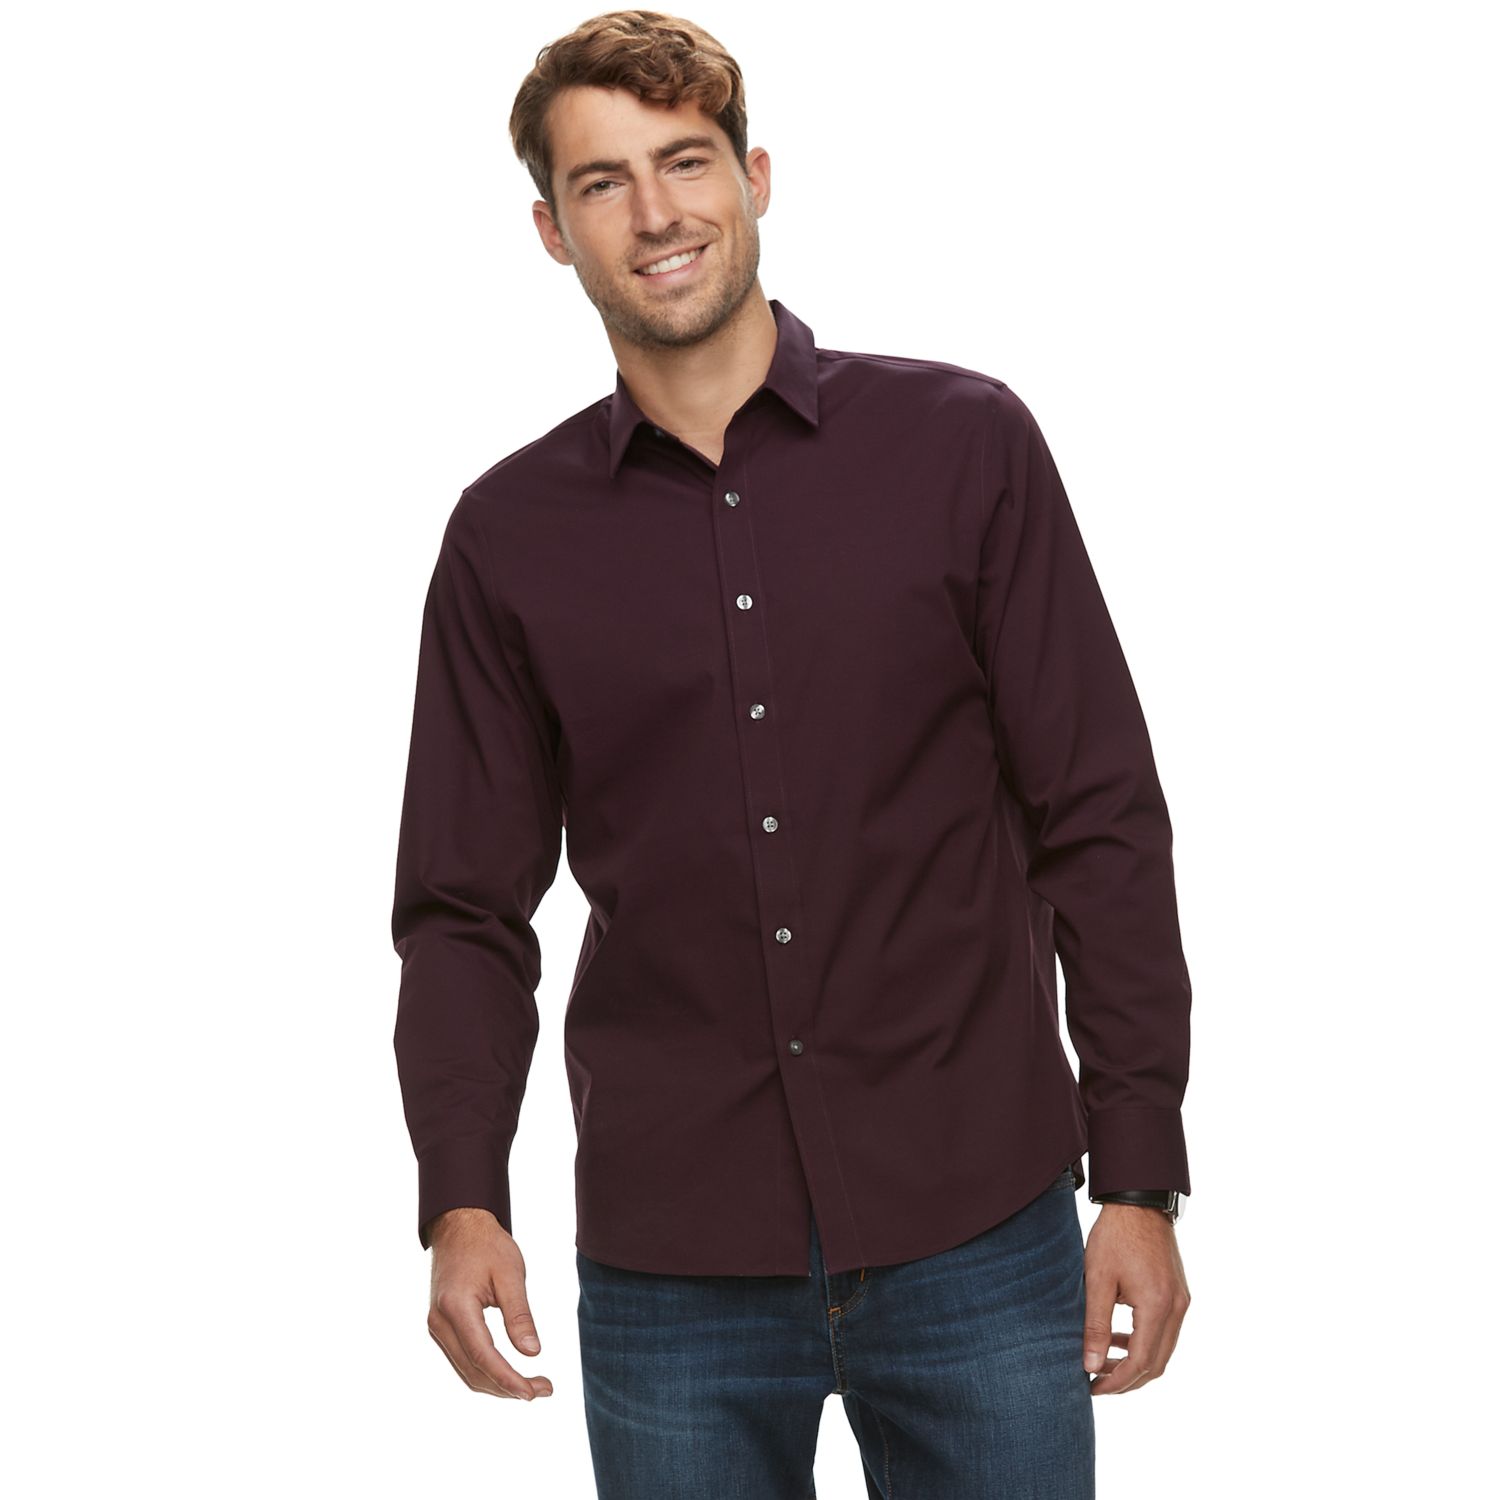 No-Iron Regular-Fit Stretch Button-Down ...